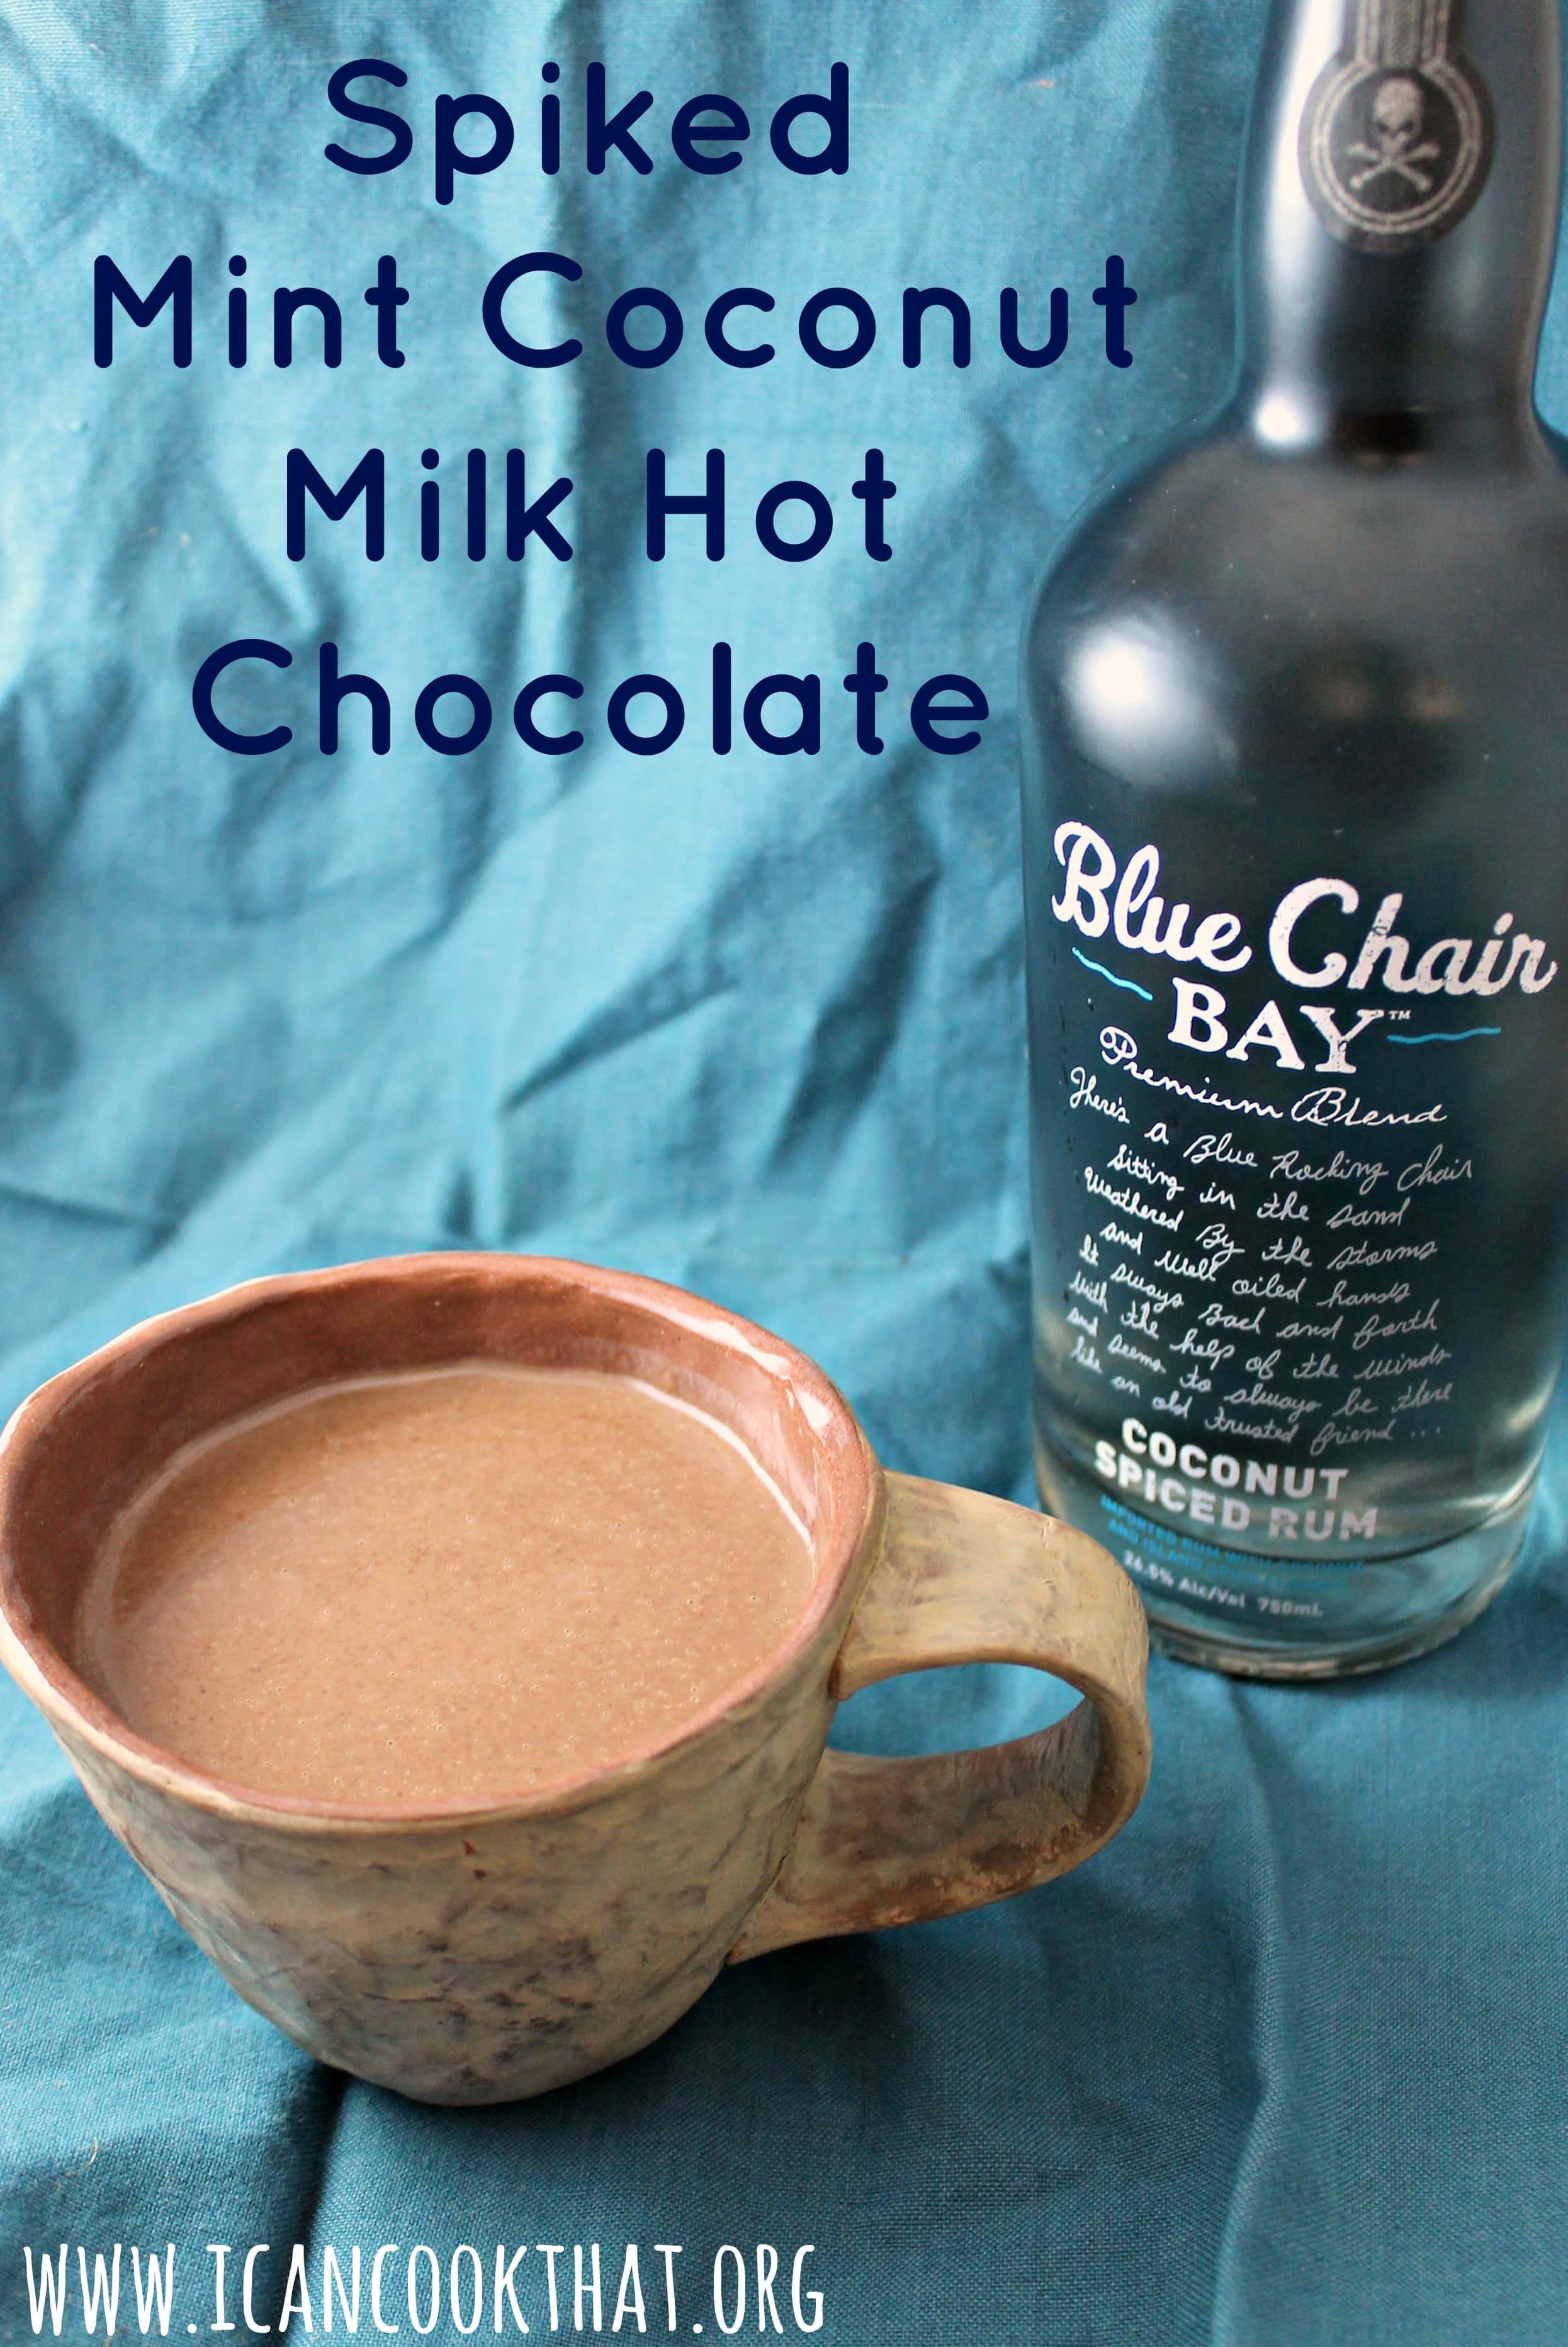 Spiked Mint Coconut Milk Hot Chocolate Recipe I Can Cook That